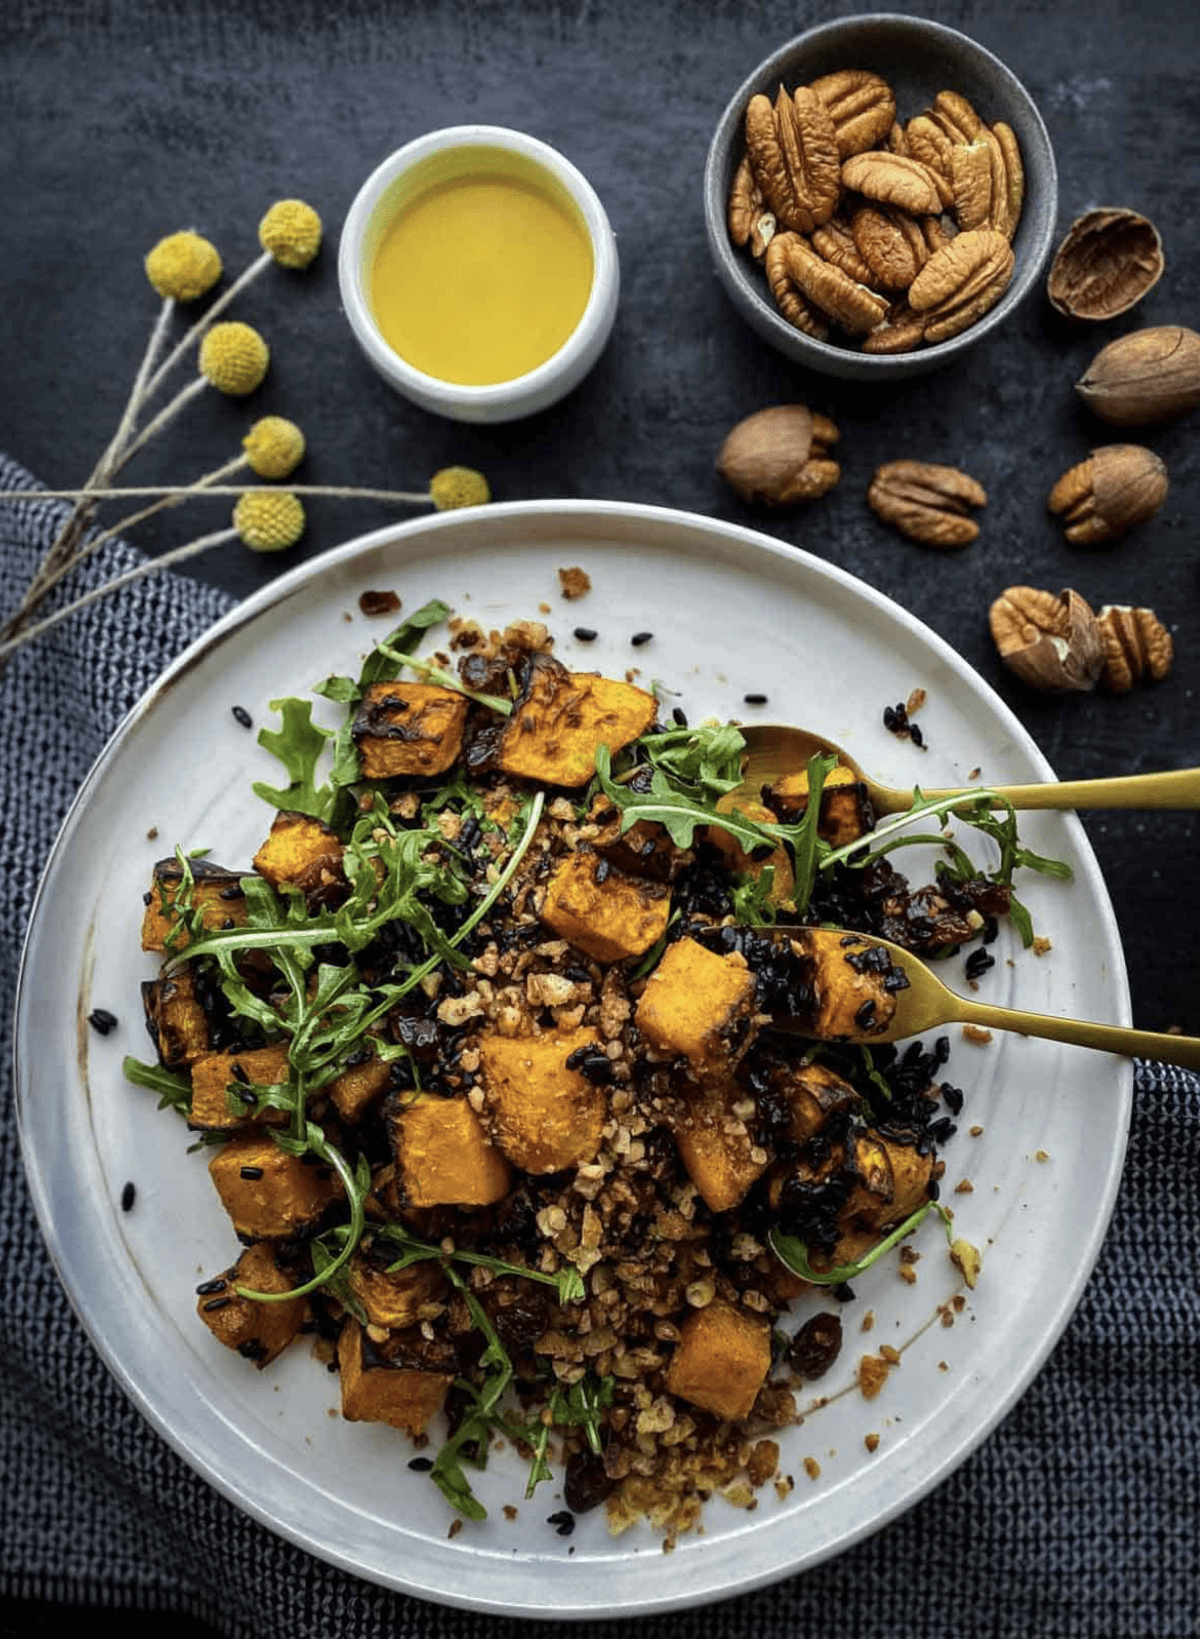 Overhead shot of Butternut Squash Salad with maple orange dressing and pecans on the side.